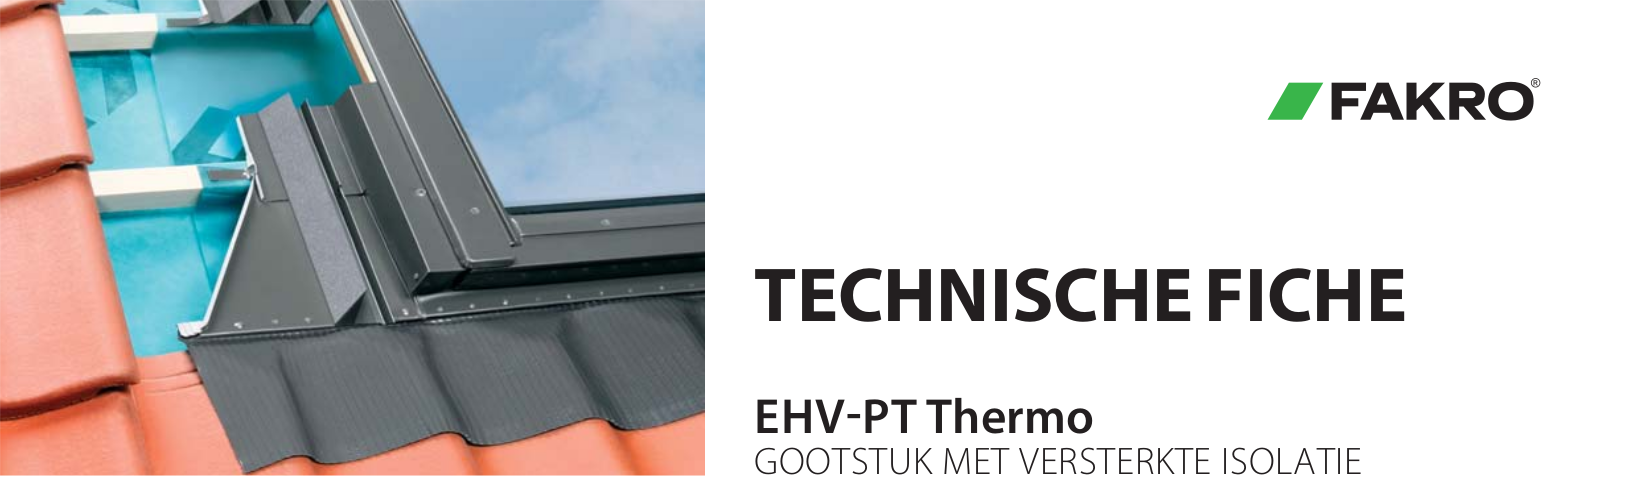 Foto EHV-PT Thermo